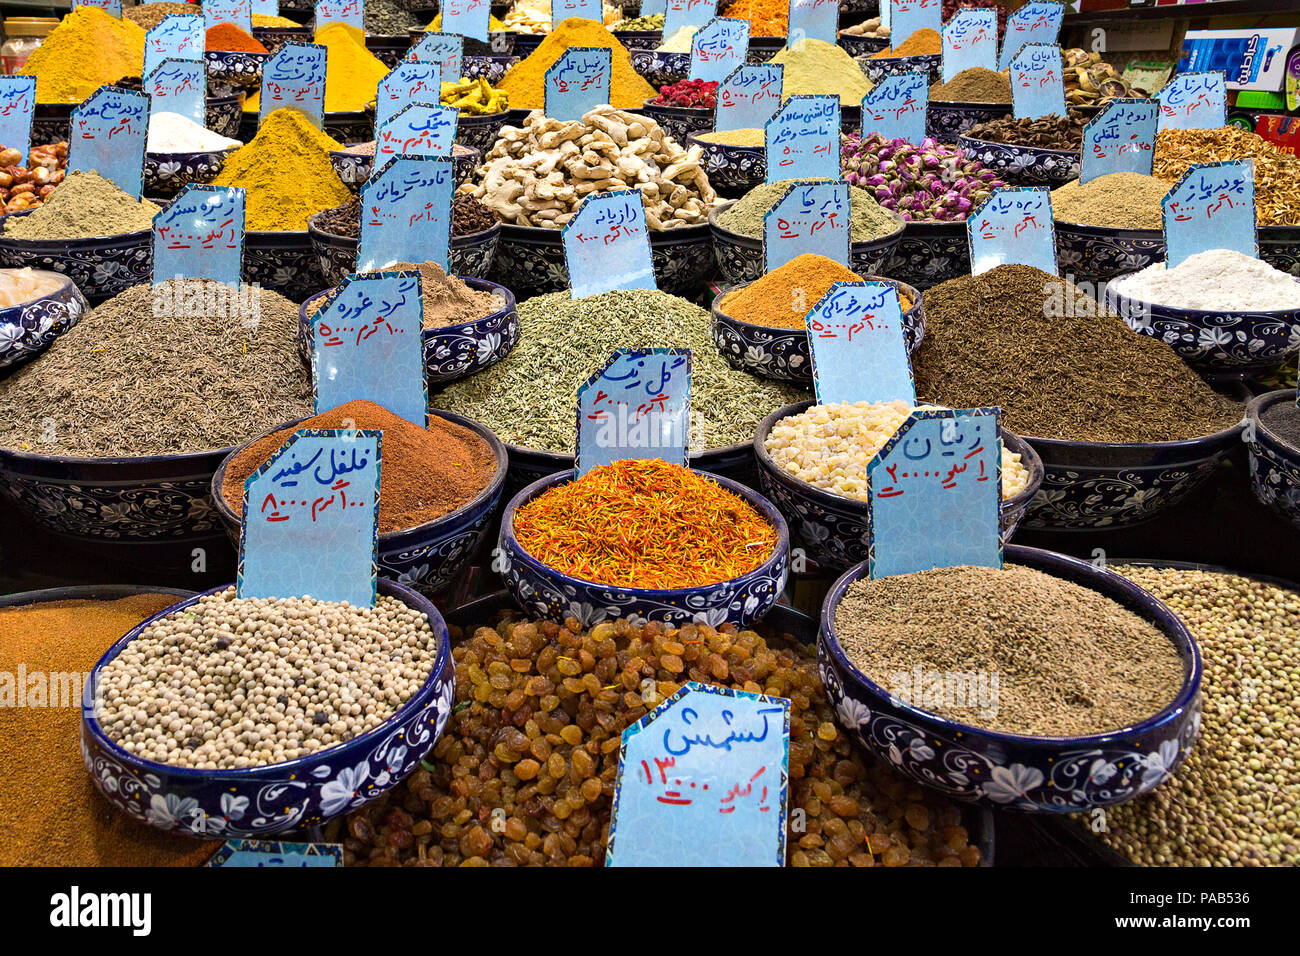 Dried fruits and spices in the Grand Bazaaar in Tehran, Iran Stock Photo